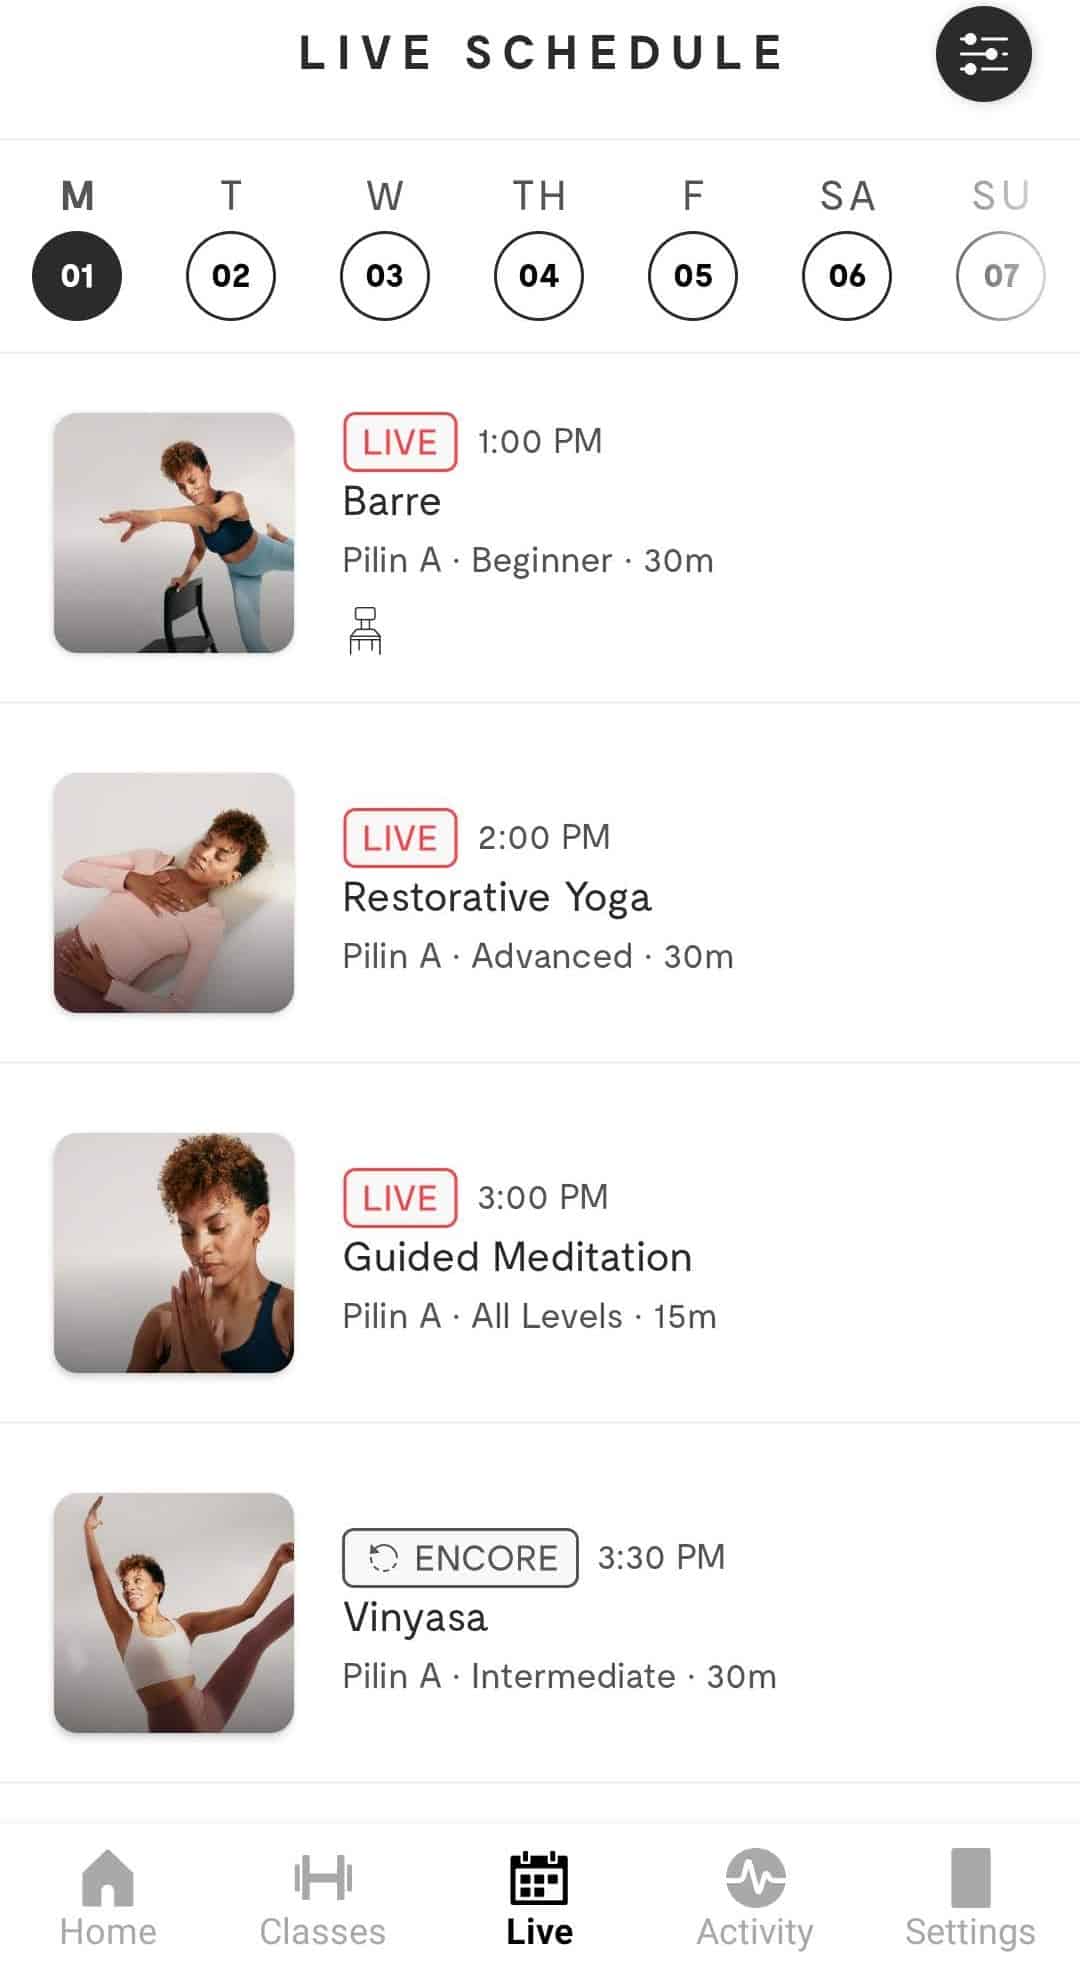 A screenshot of the live class offerings on the lululemon studio app.